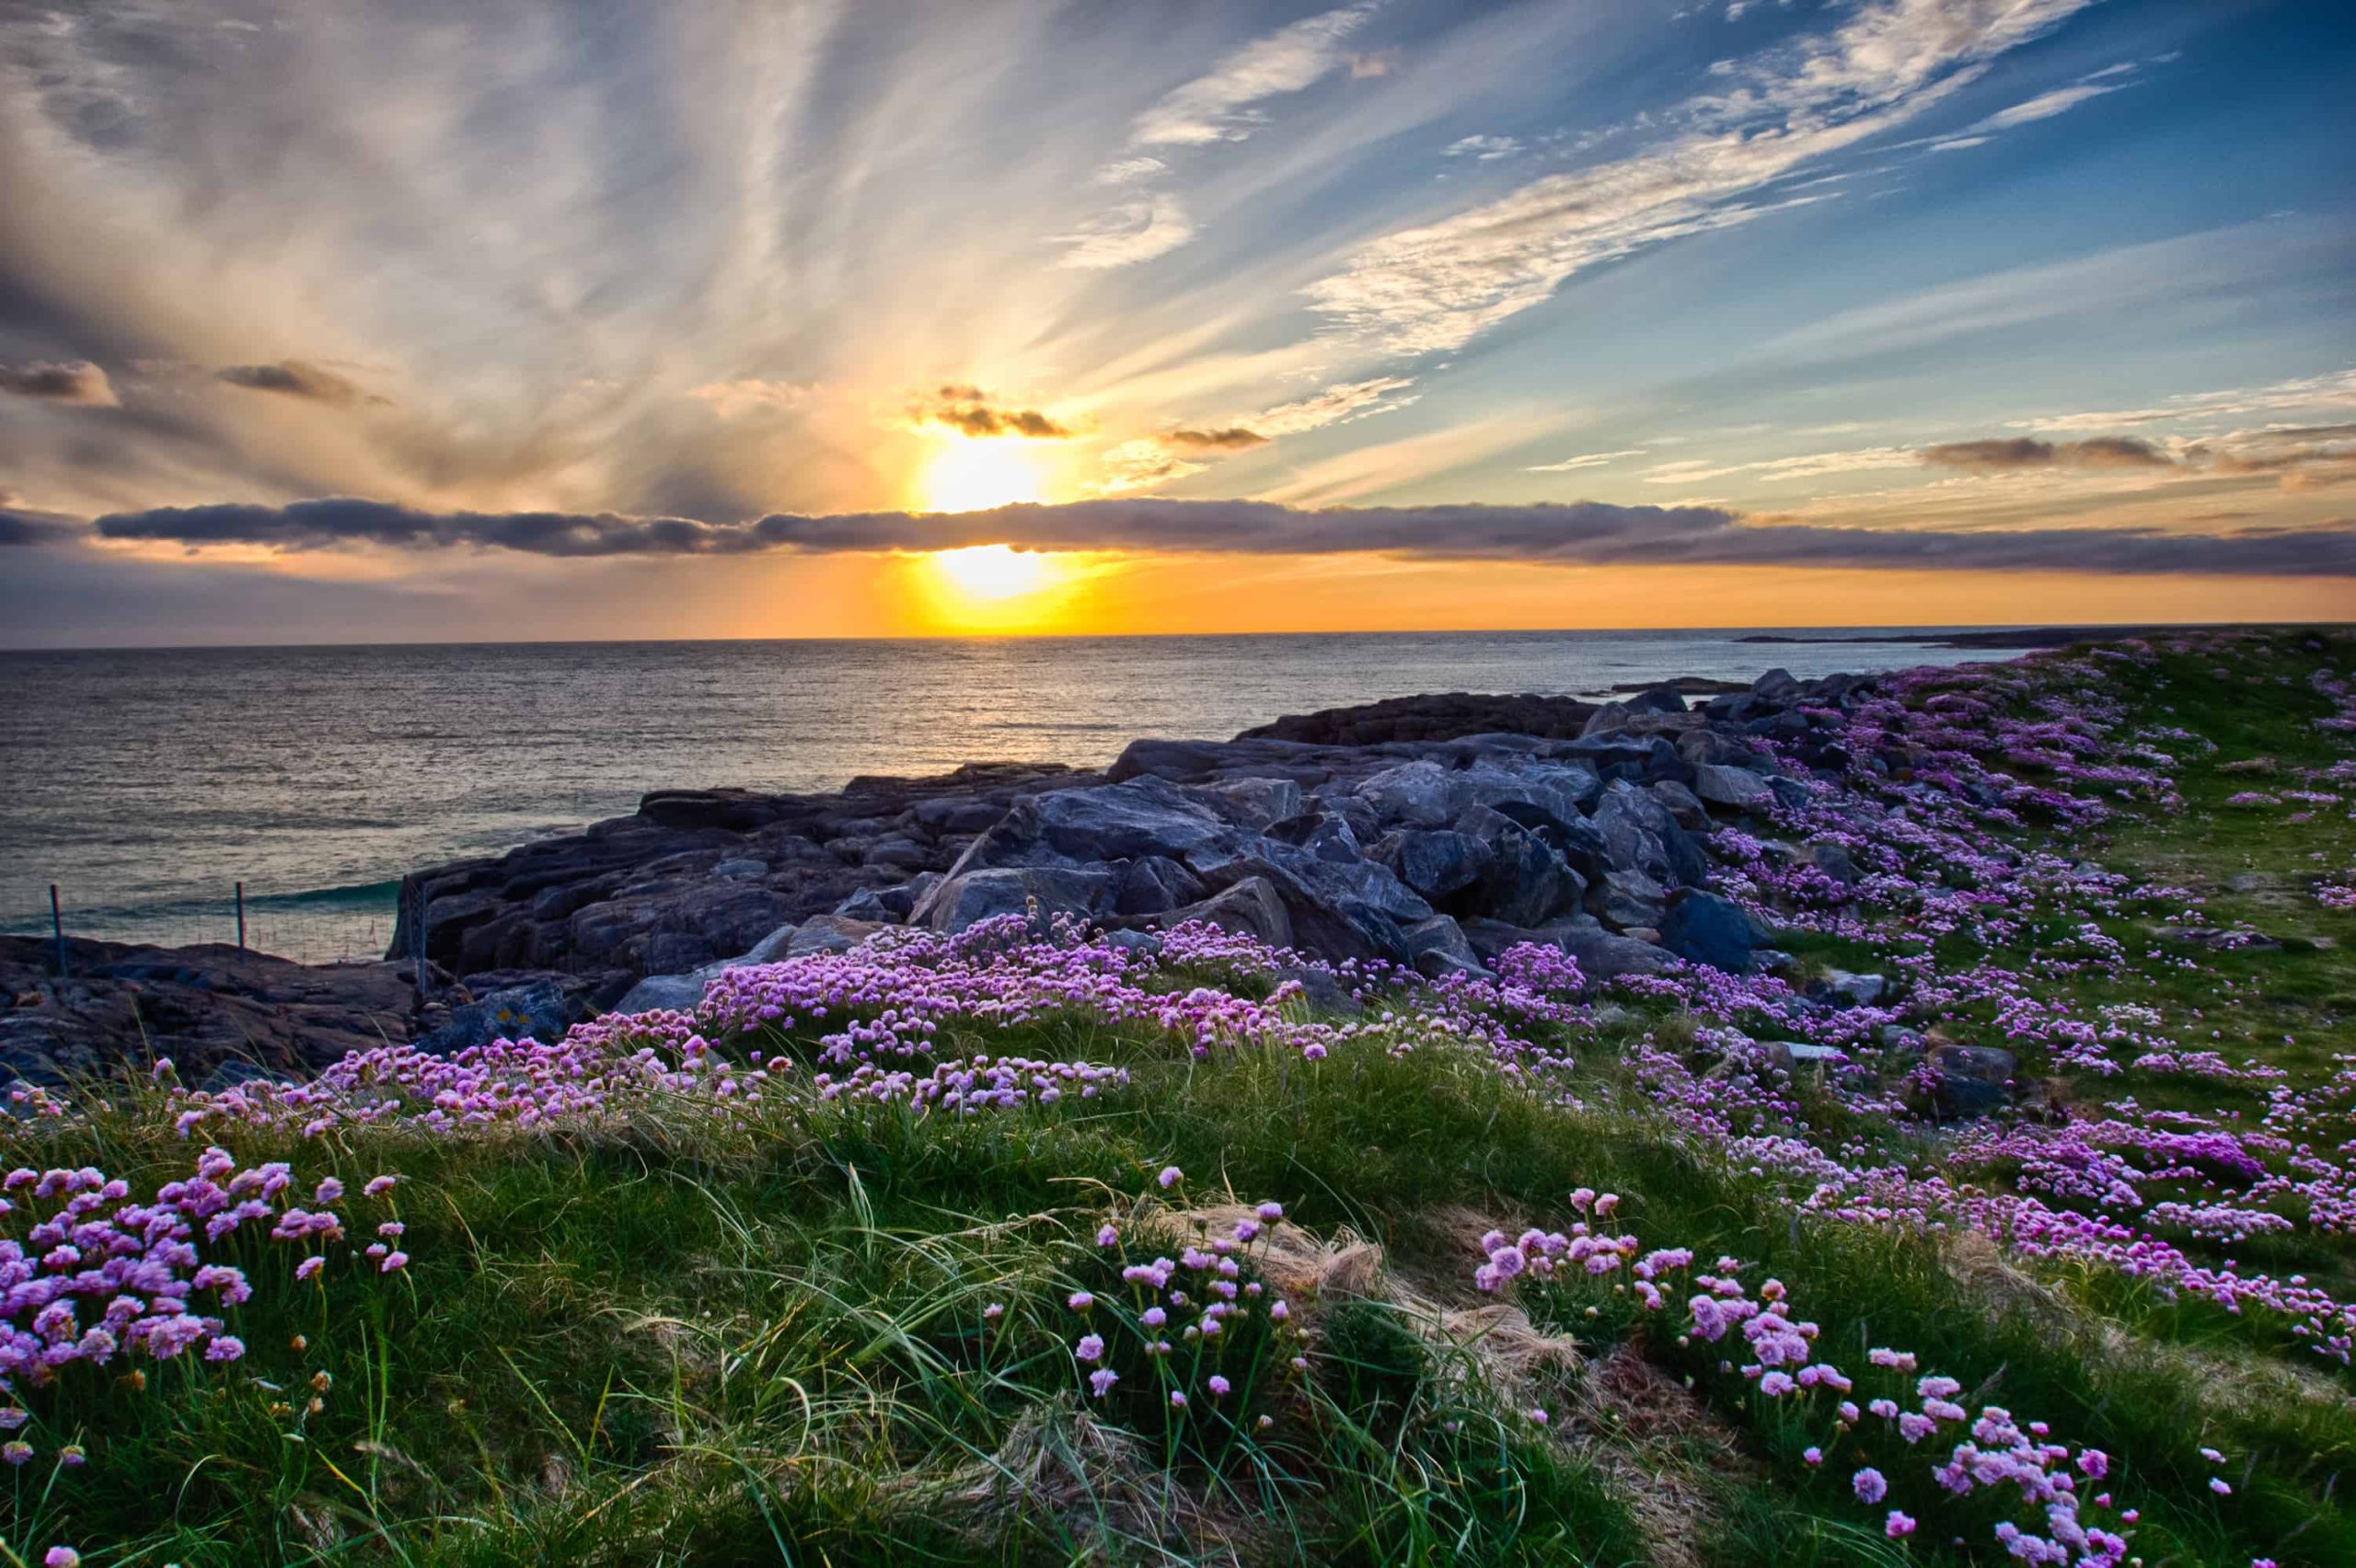 Field of flowers over a cliff by the sea